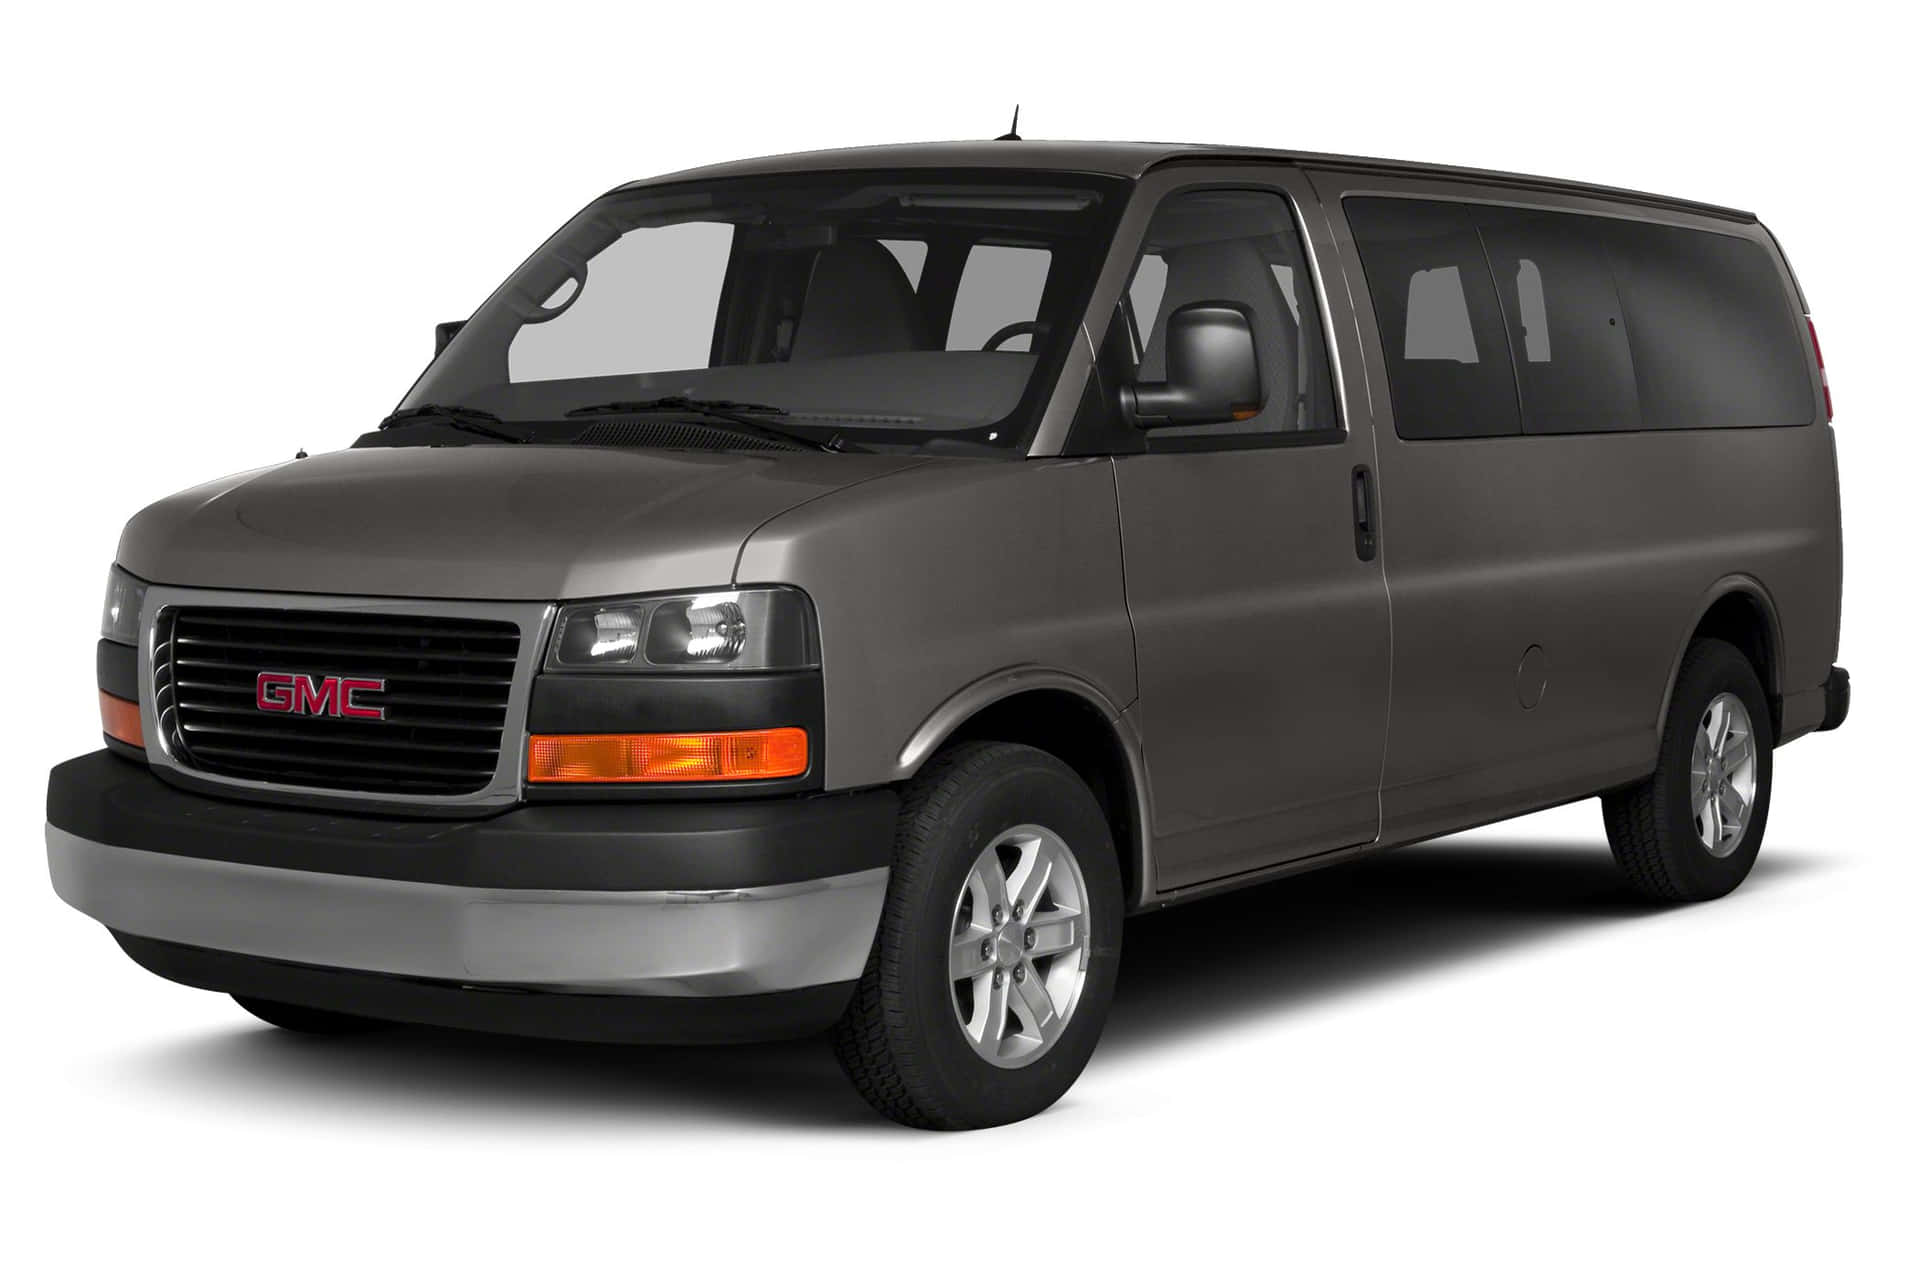 Sleek GMC Savana Expertly Engineered for Unmatched Capability and Comfort Wallpaper